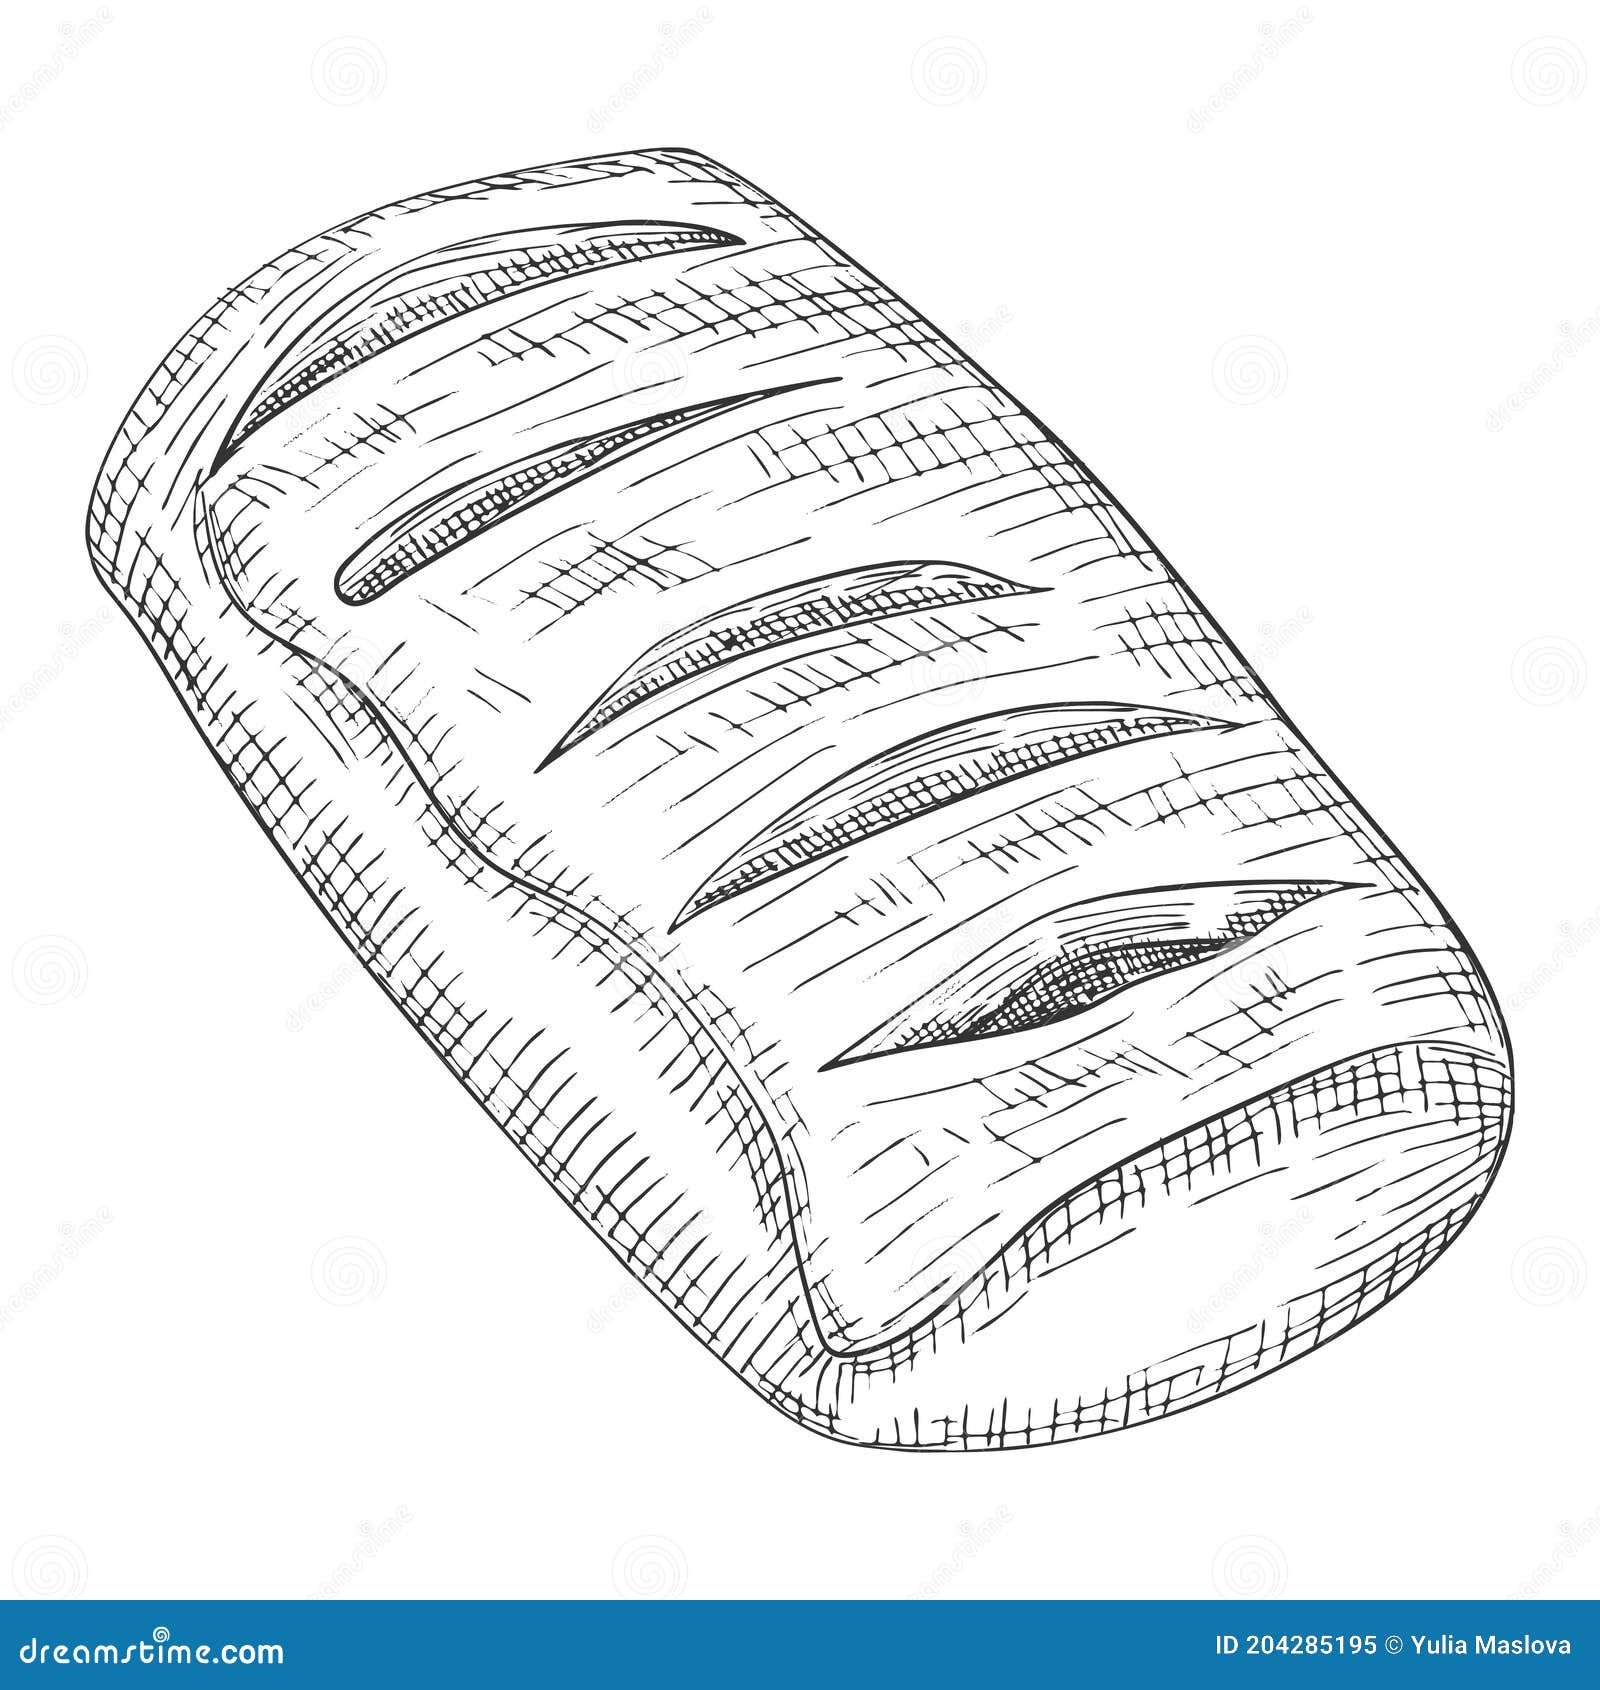 Colored Drawing Banana Bread Bread Vector Stock Vector (Royalty Free)  1496703887 | Shutterstock